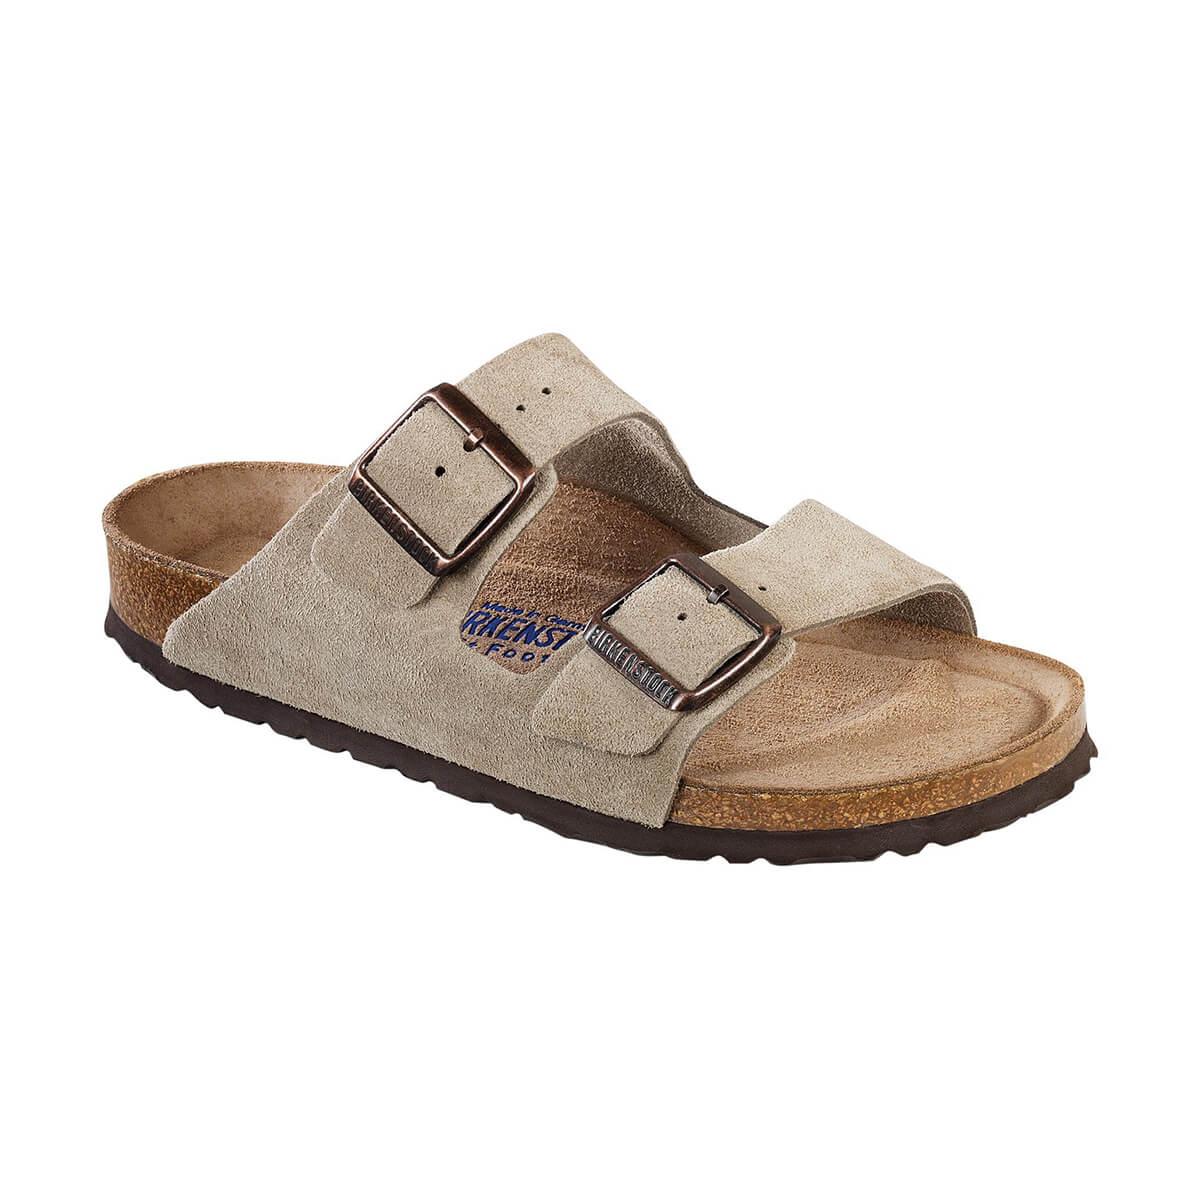 difference between birkenstock soft footbed